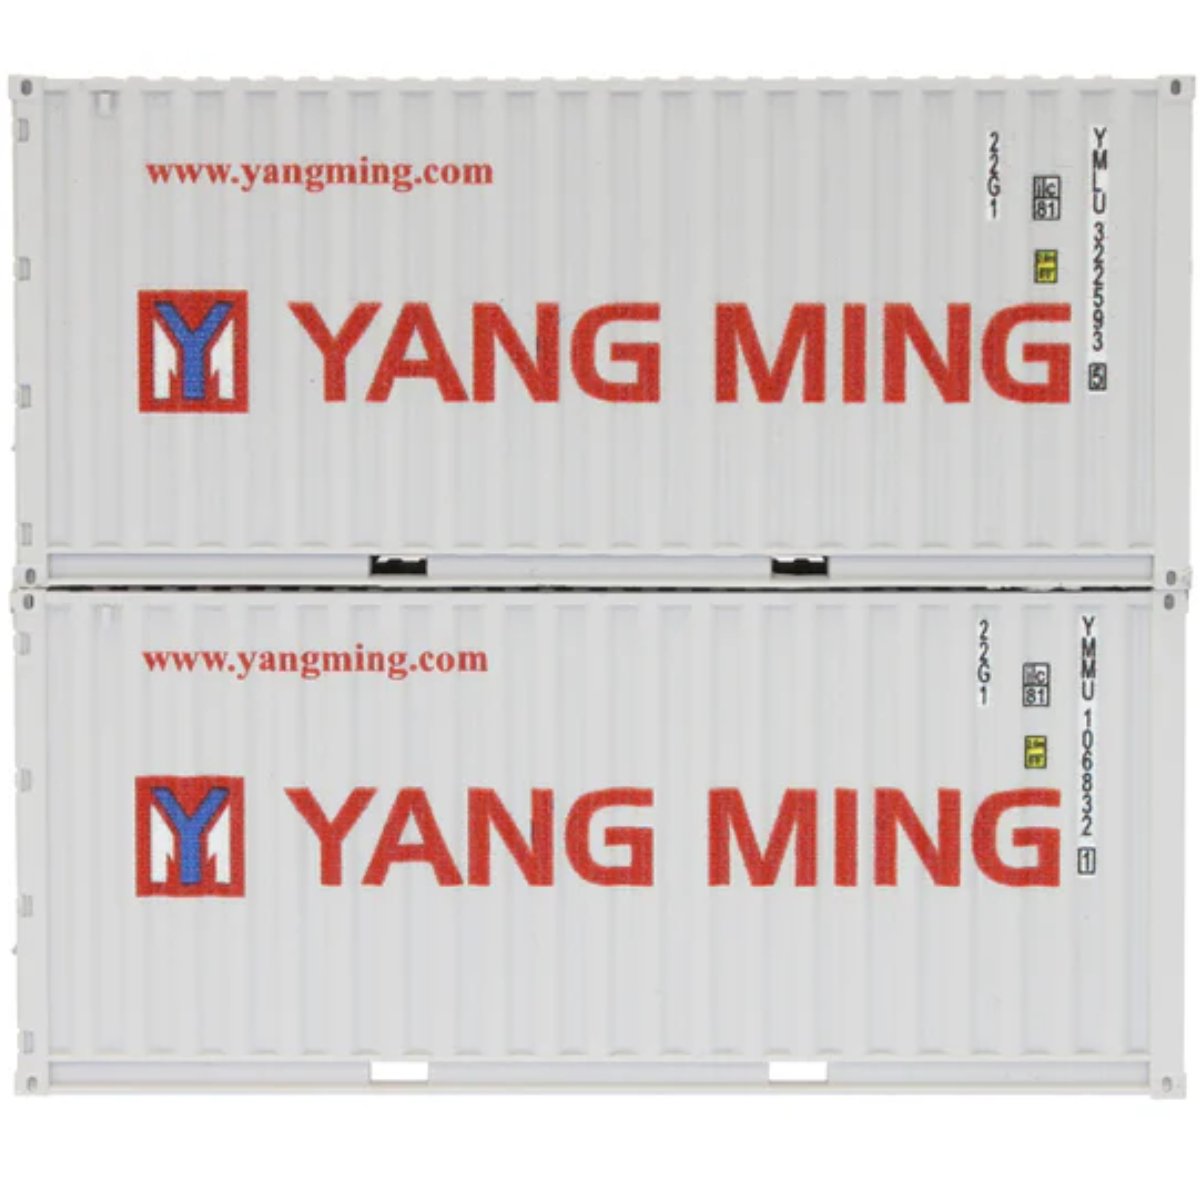 Dapol 4F - 028 - 059 20ft Containers Yang Ming 322593 5 & 106832 1 - OO Gauge - Phillips Hobbies